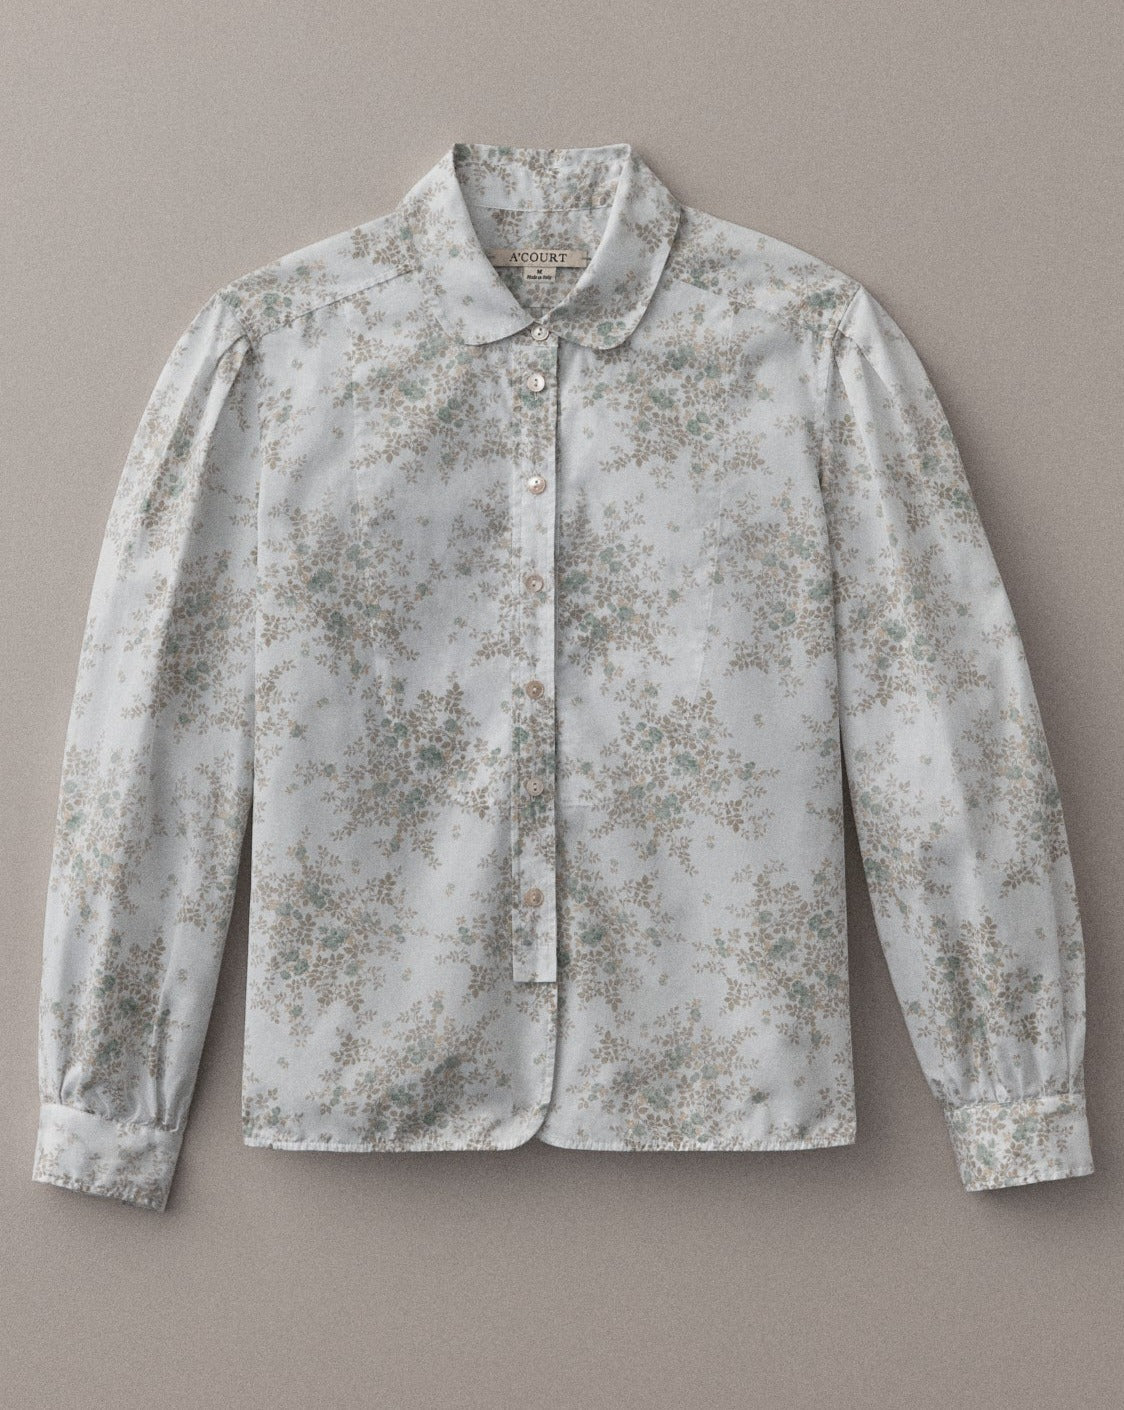 A long sleeve blouse in floral cotton with a classic menswear silhouette lies flat on a light brown field.